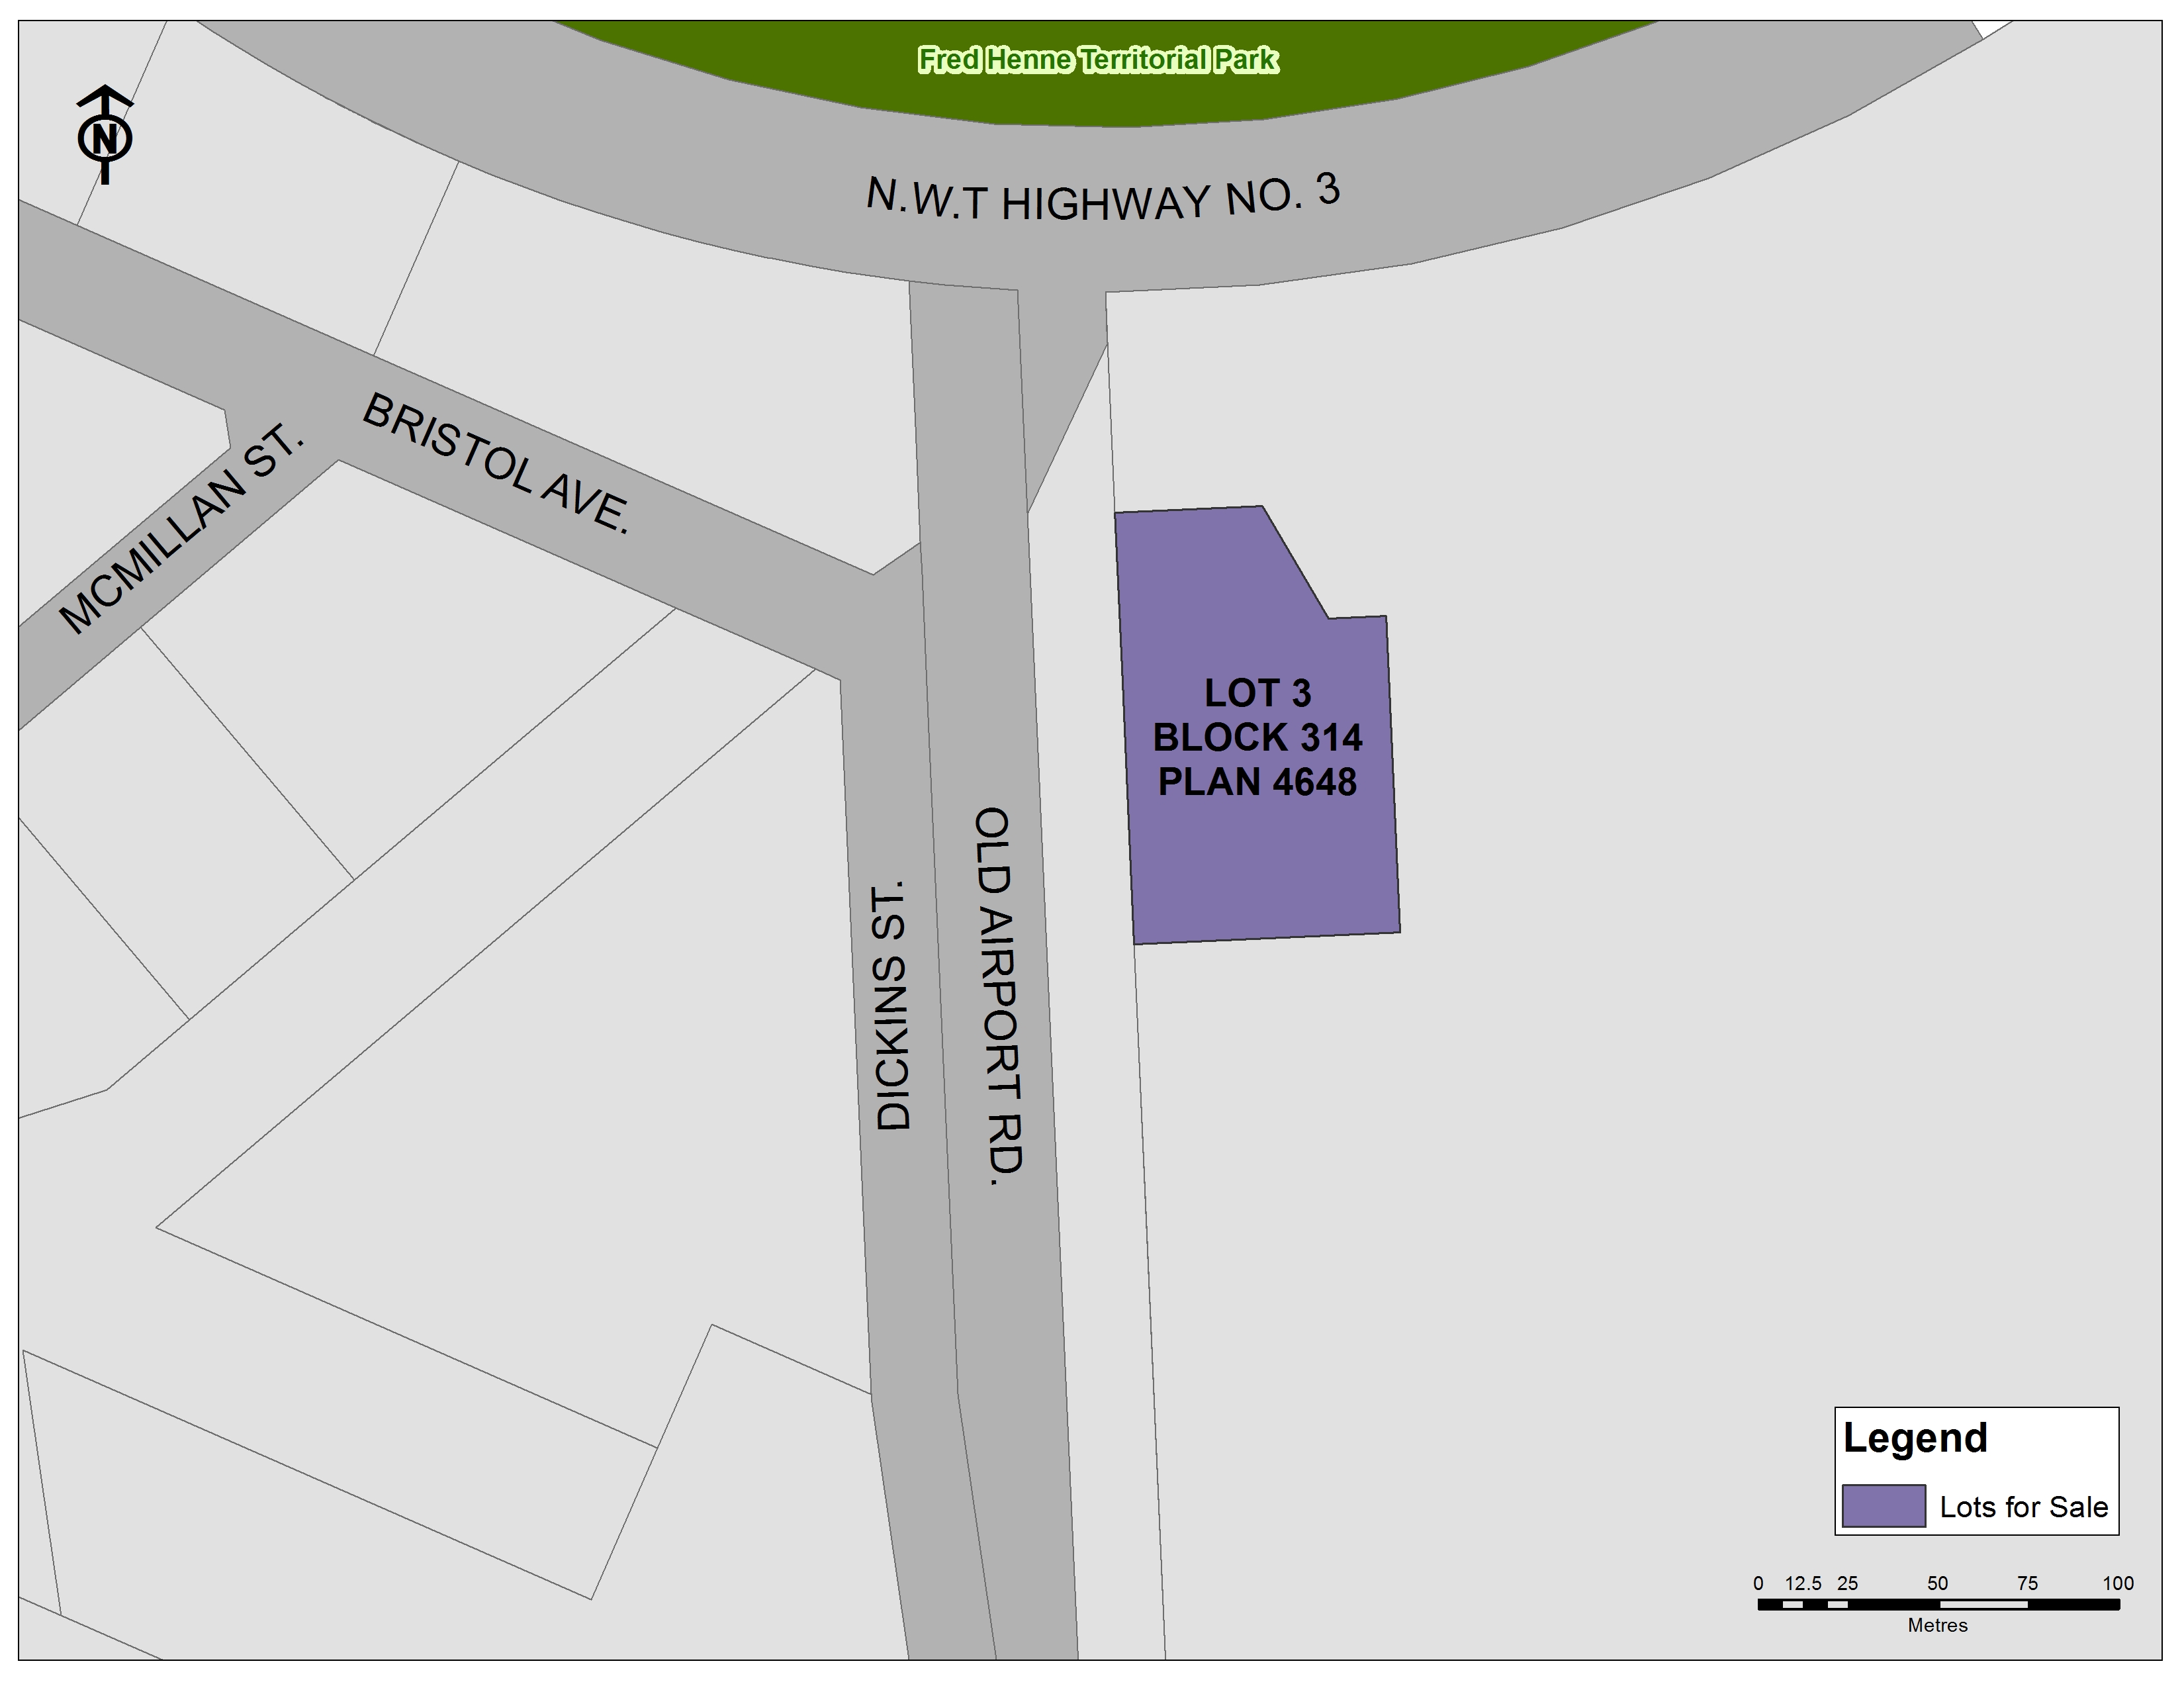 Lot 3 is located on the east side of Old Airport Rd.